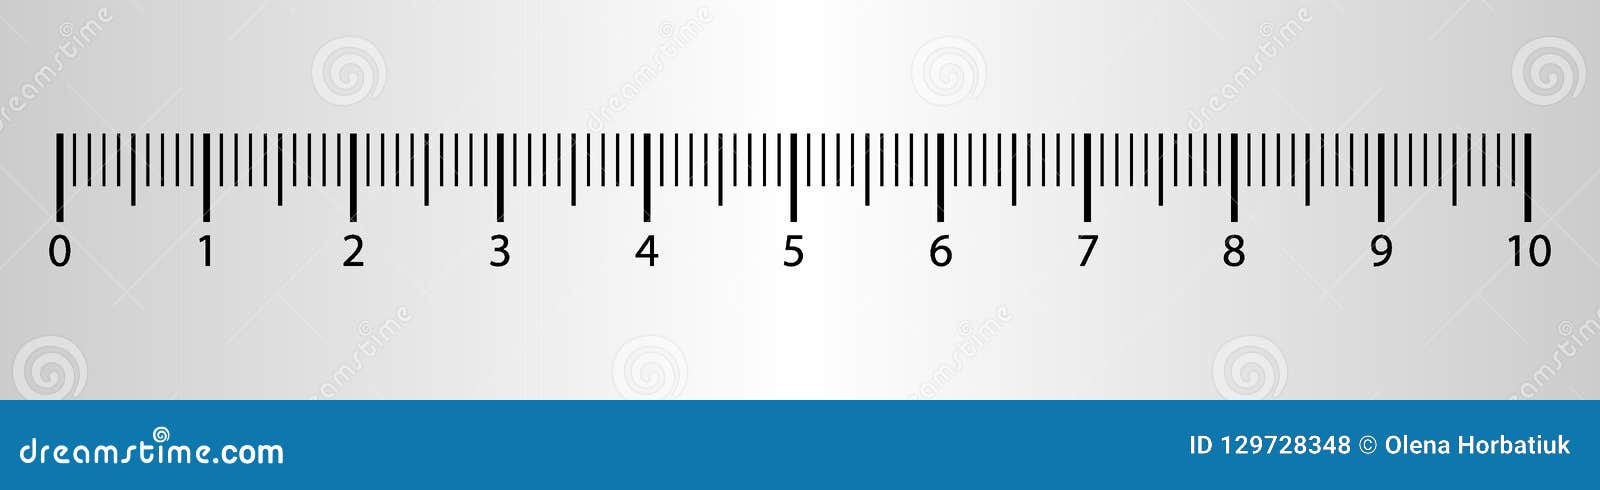 10-centimeters-ruler-measurement-tool-with-numbers-scale-vector-cm